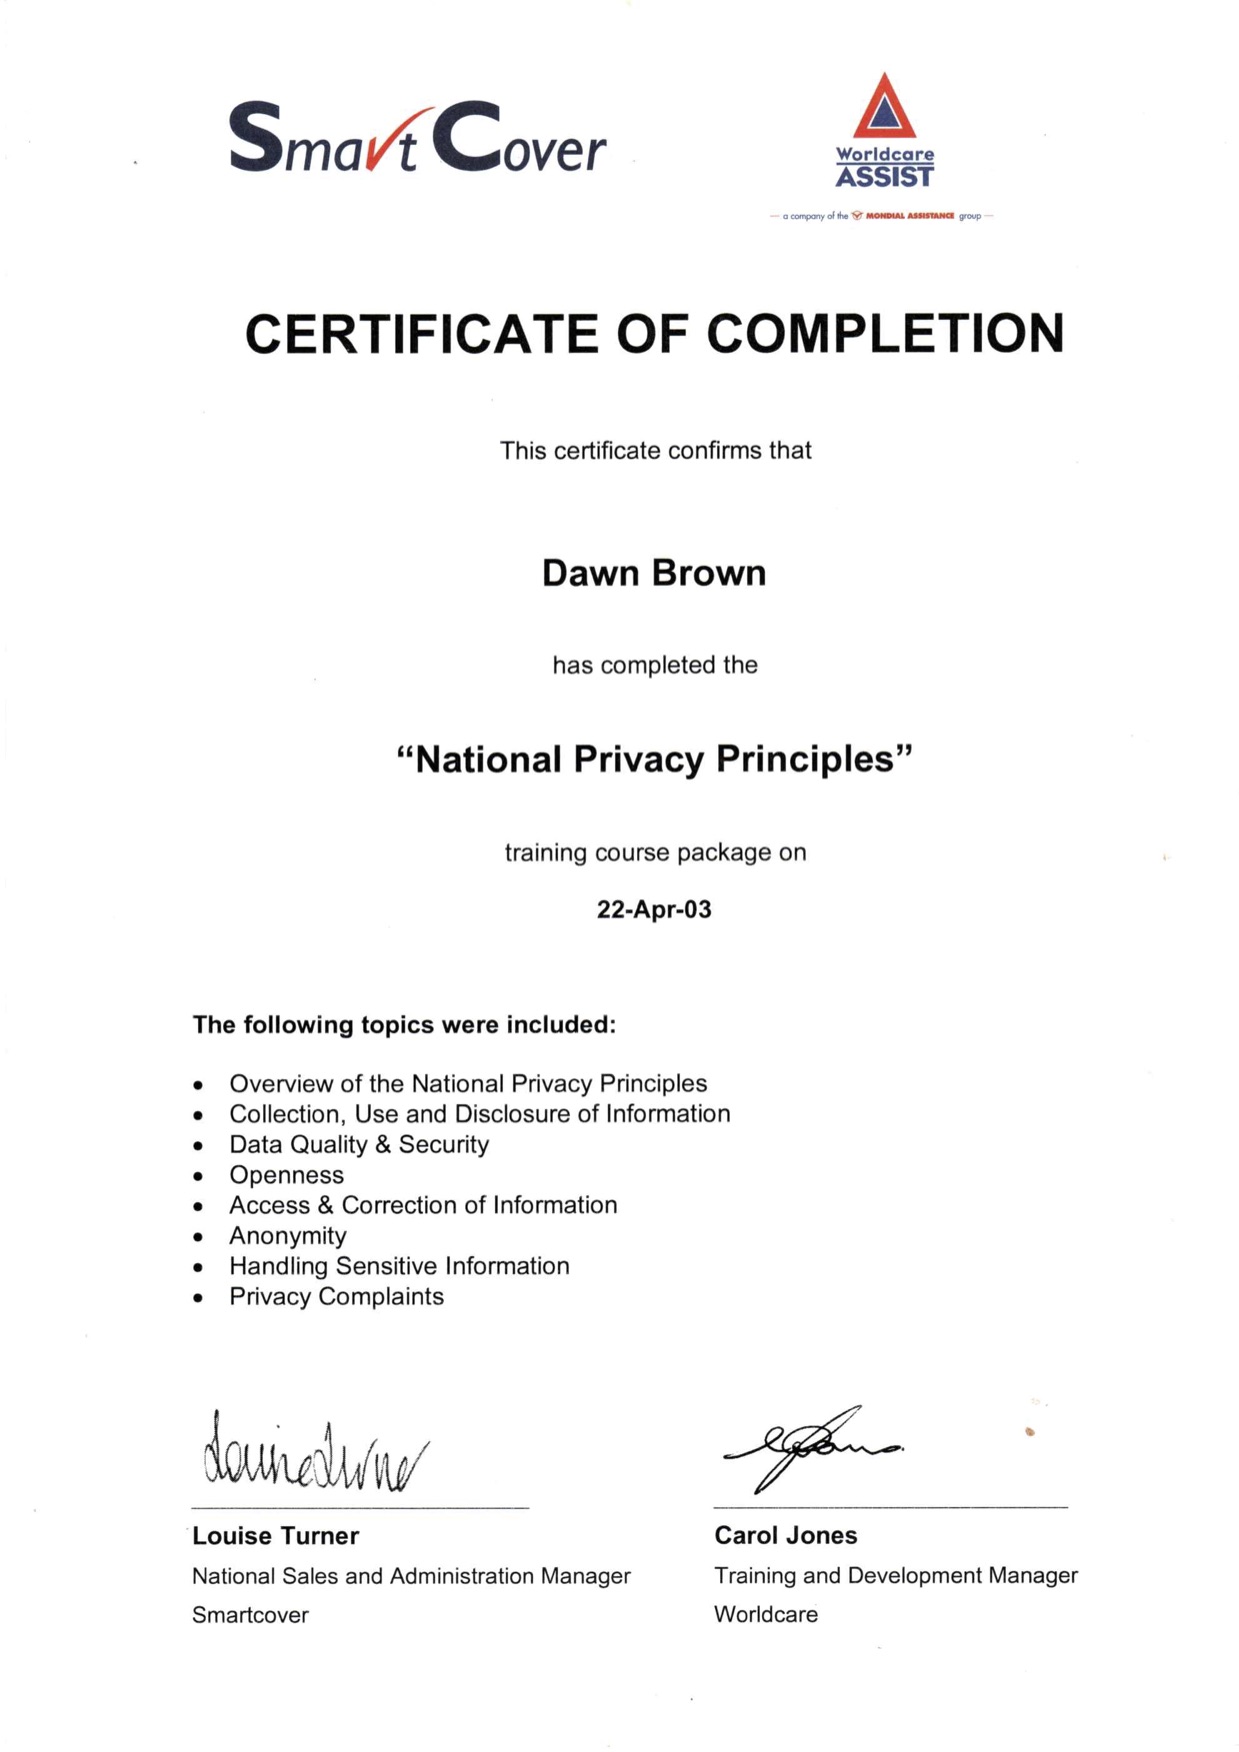 Smart cover national privacy principles training certificate